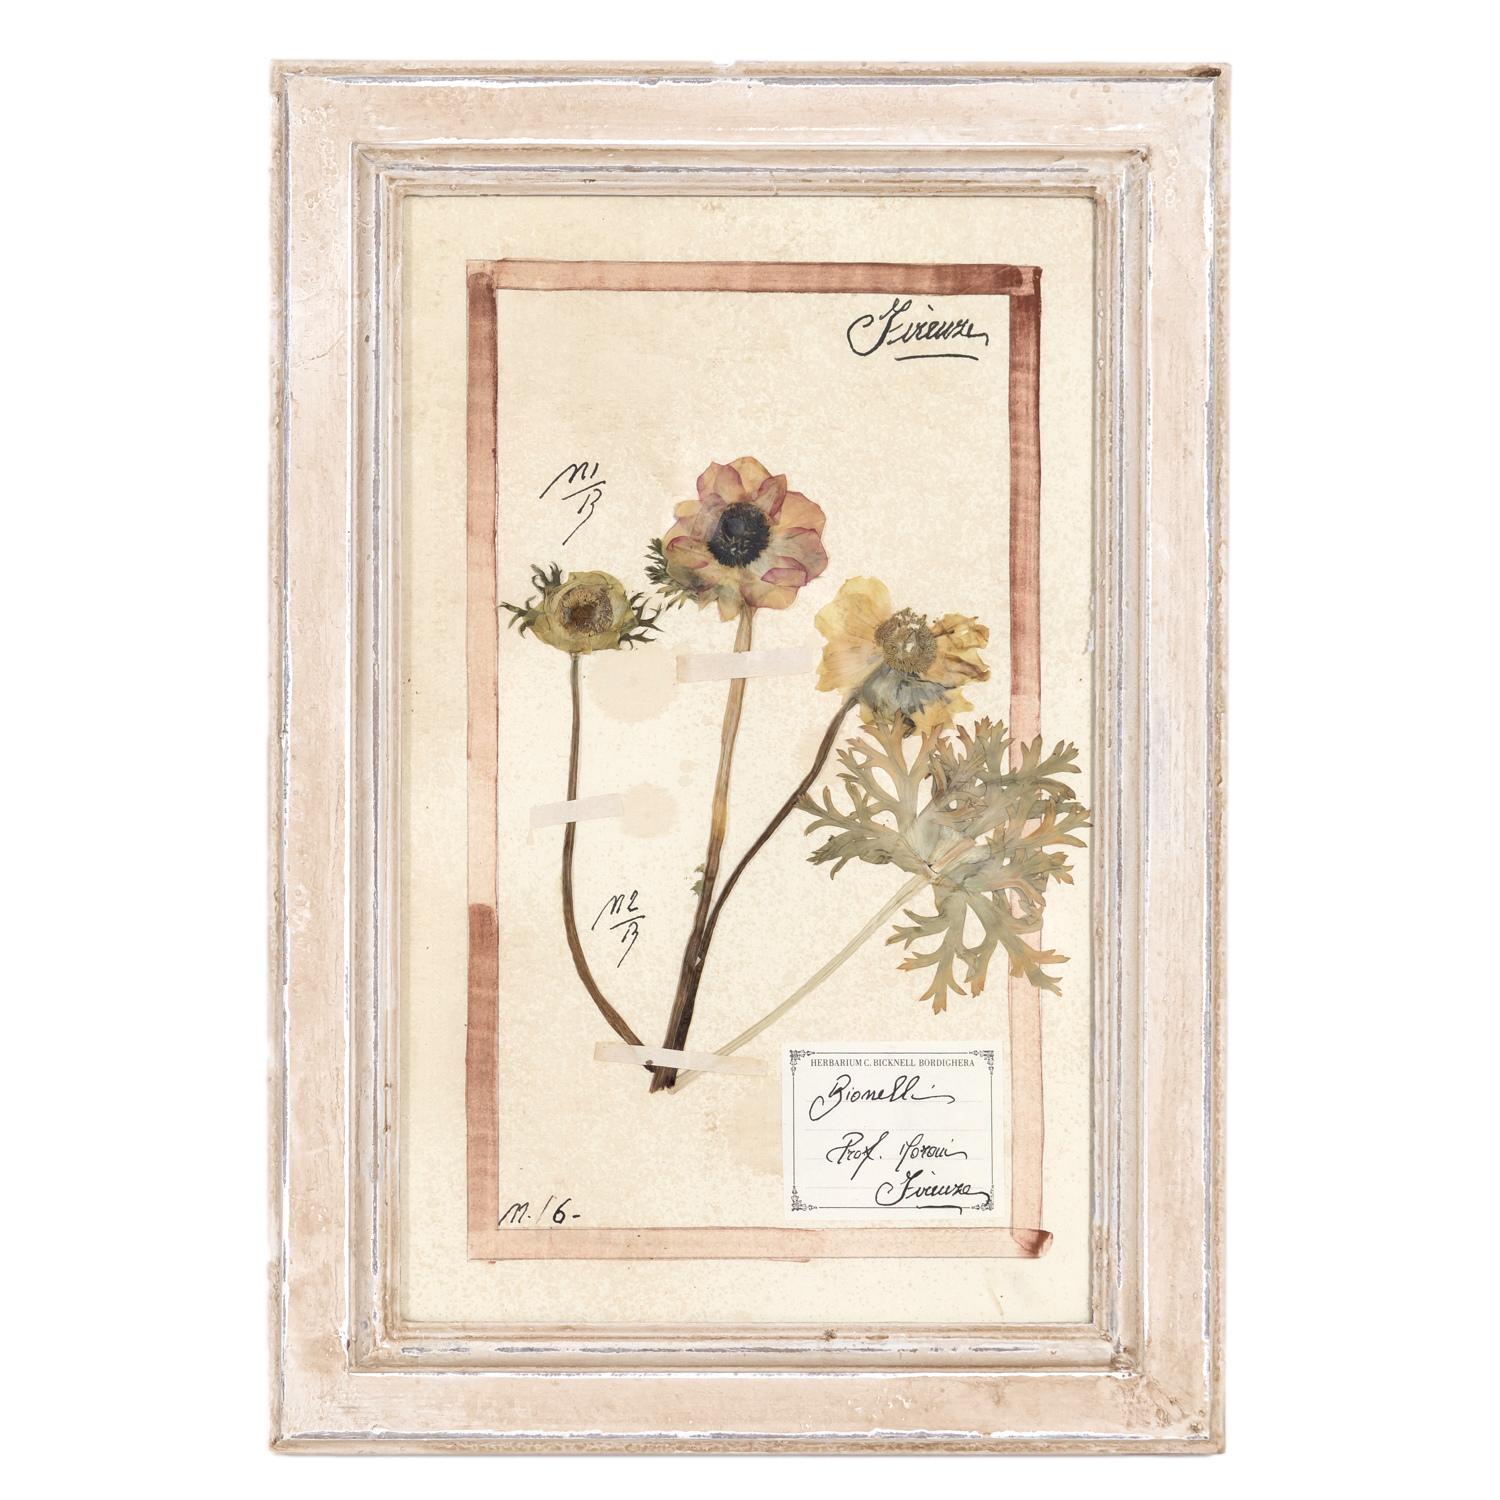 A beautiful and decorative framed early 20th century Italian herbier catalogued by hand with the Latin or botanical name of the plant, catalog number, and 